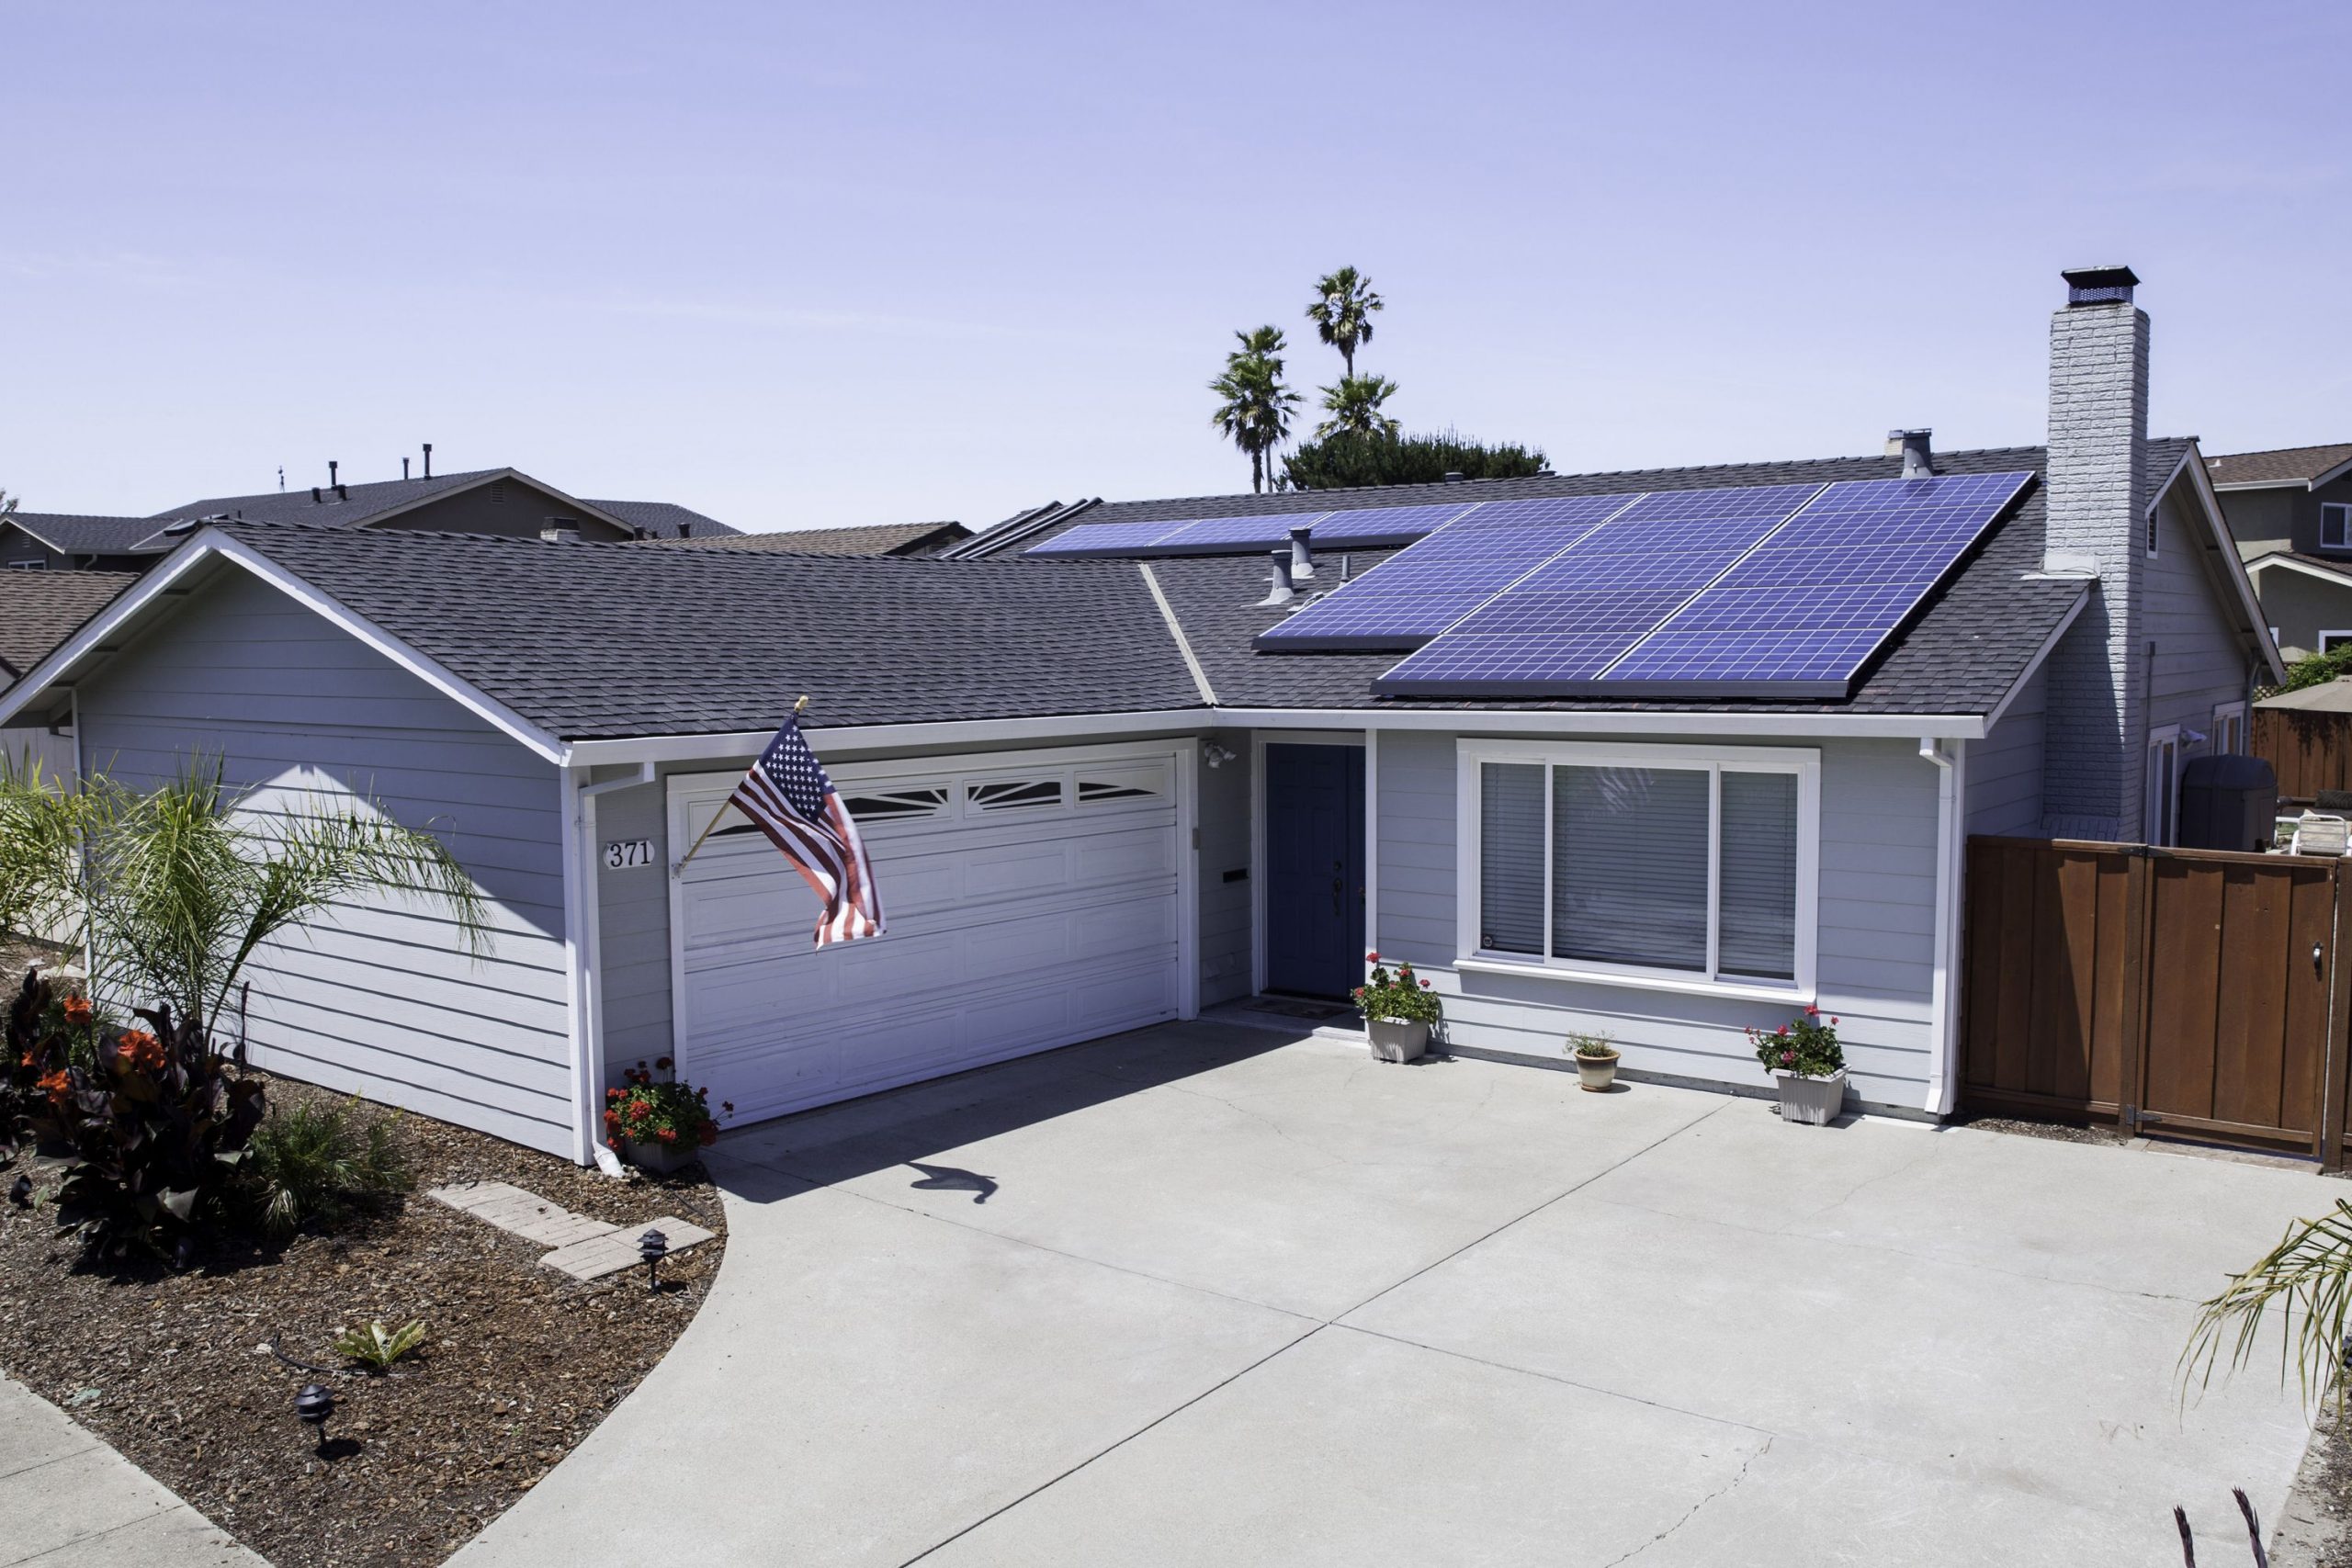 How to Get Solar Panels For Your Home (For Free)